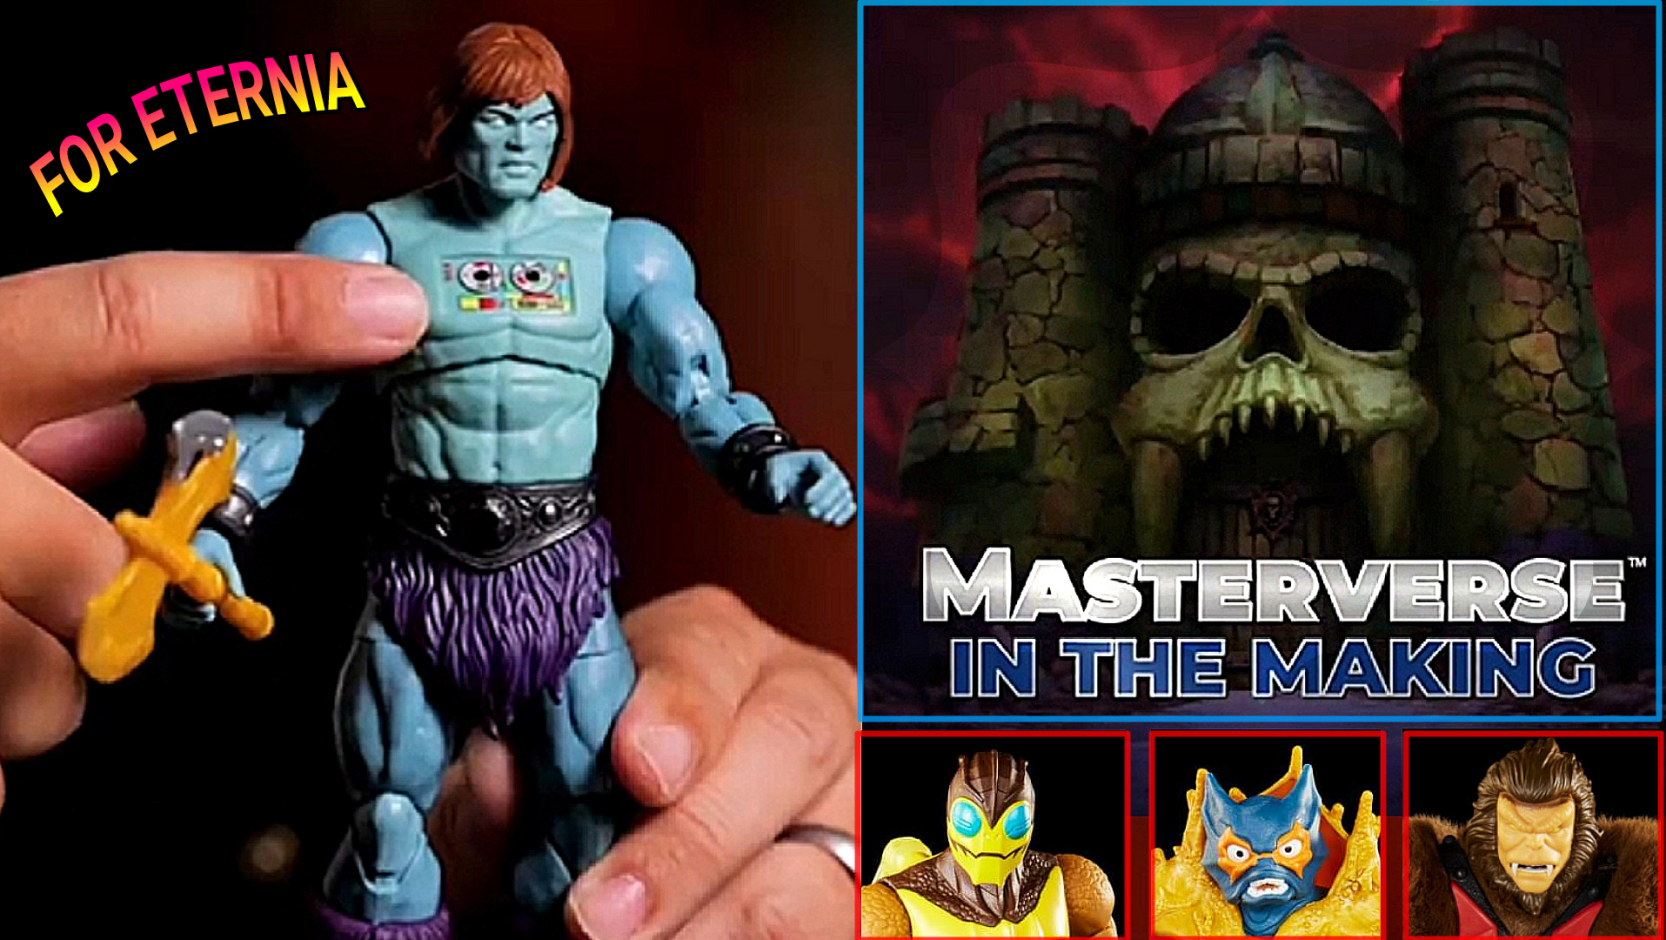 New ”Masterverse in the Making” – Faker, Buzz-Off, Mer-Man and Grizzlor Action Figure Promo Video Released